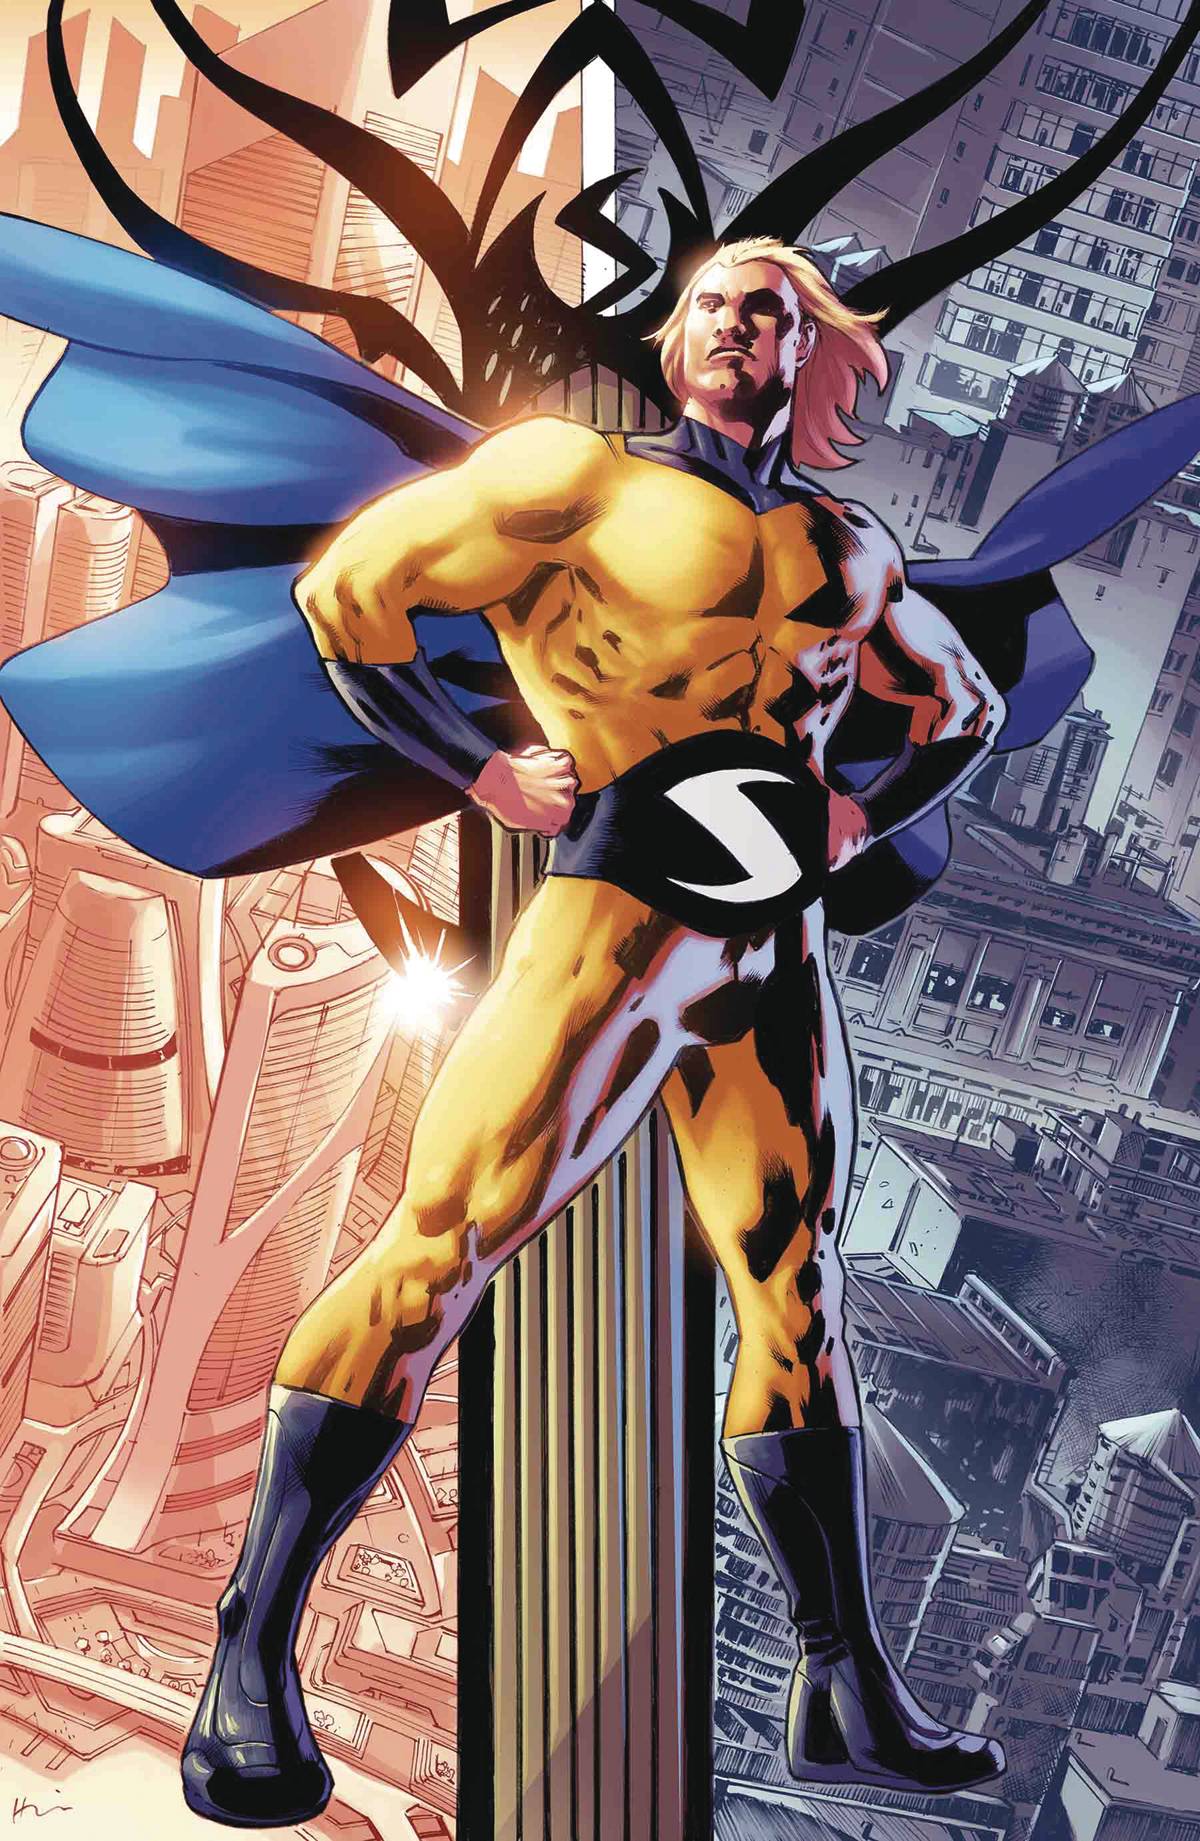 SENTRY #1 RELEASE DATE 06/27